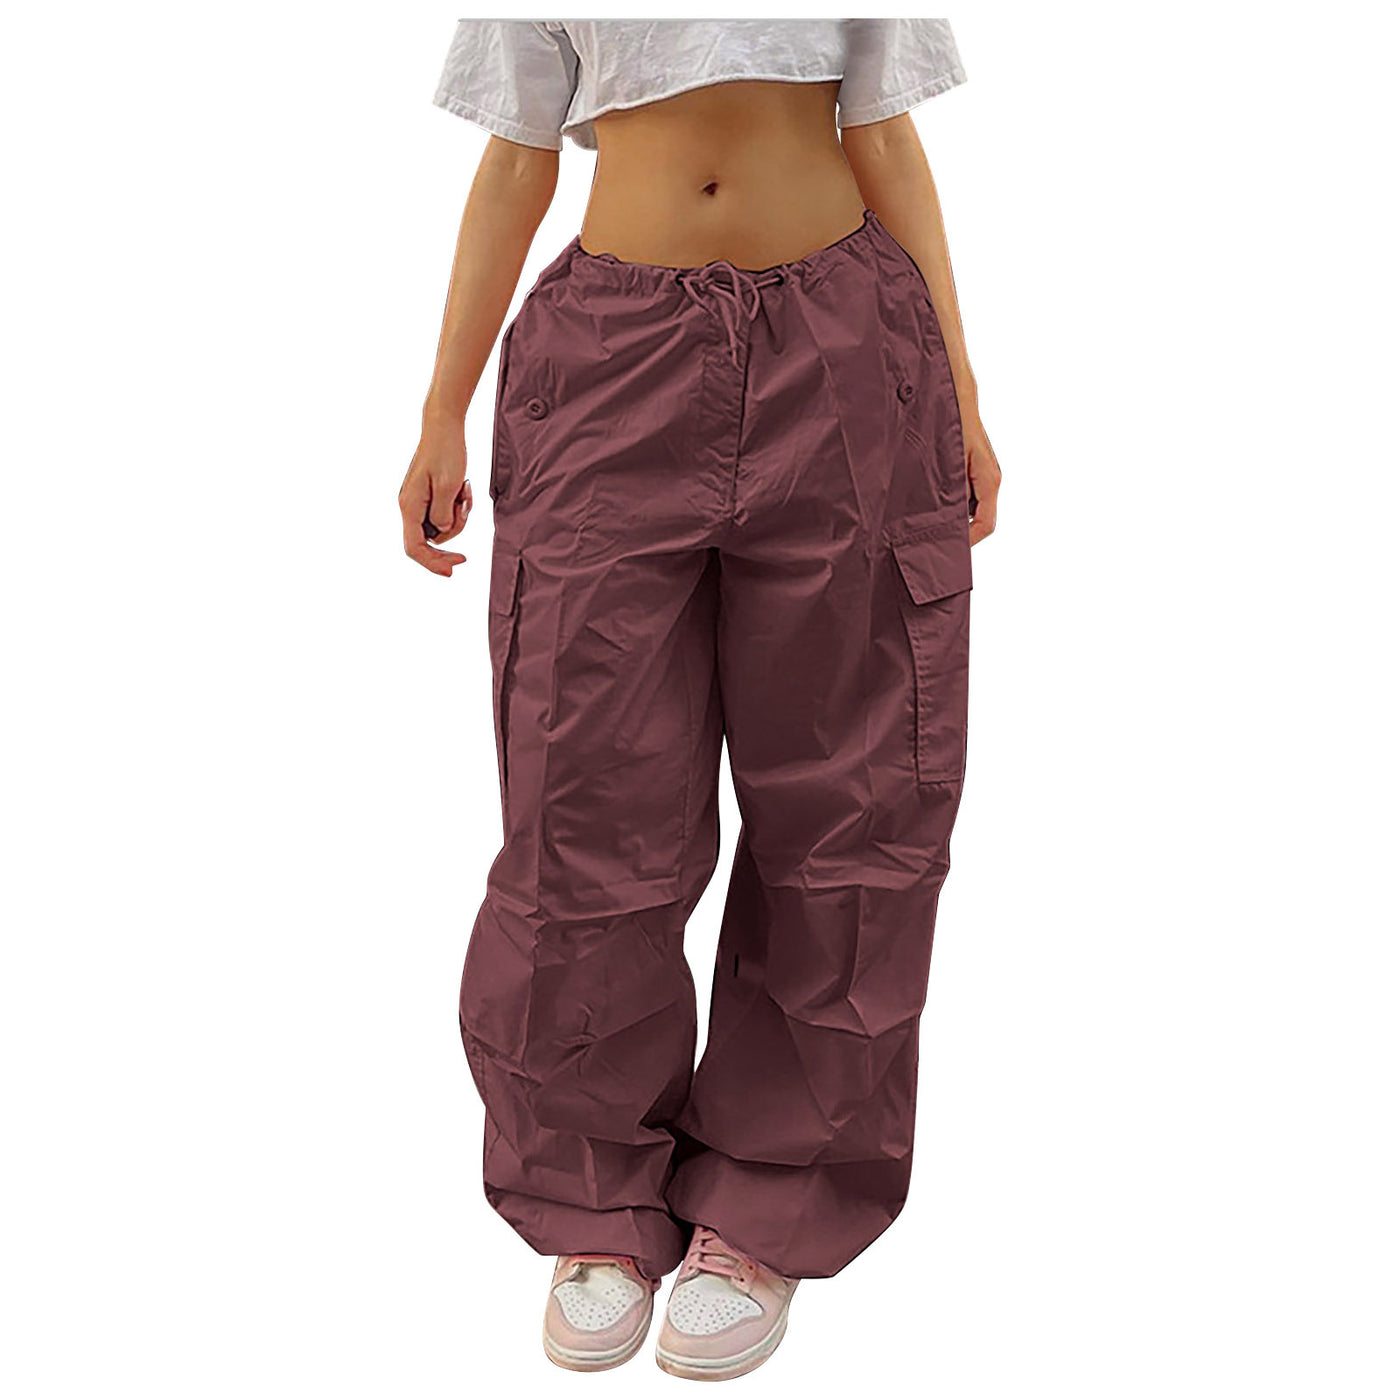 Casual Cargo Pants For Women Solid Color Drawstring Pocket Design Fashion Street Trousers Girls